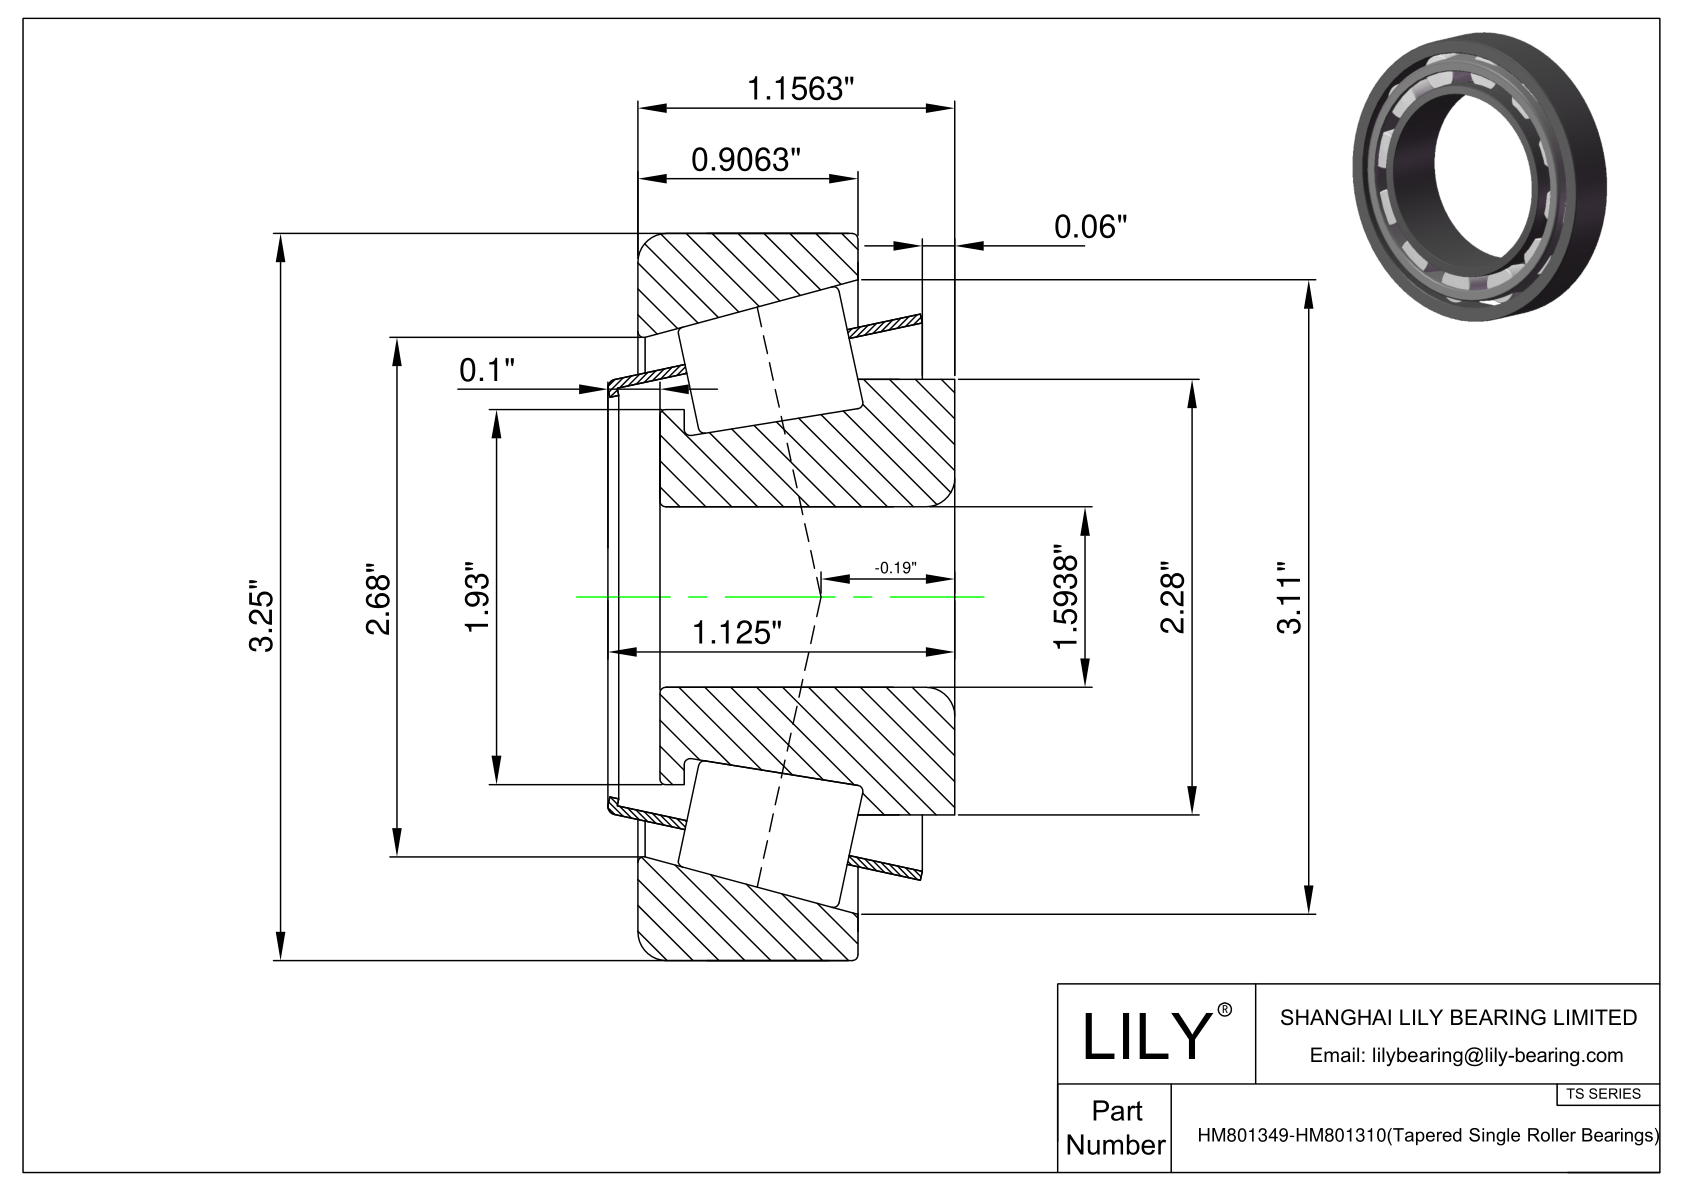 HM801349-HM801310 TS (Tapered Single Roller Bearings) (Imperial) cad drawing